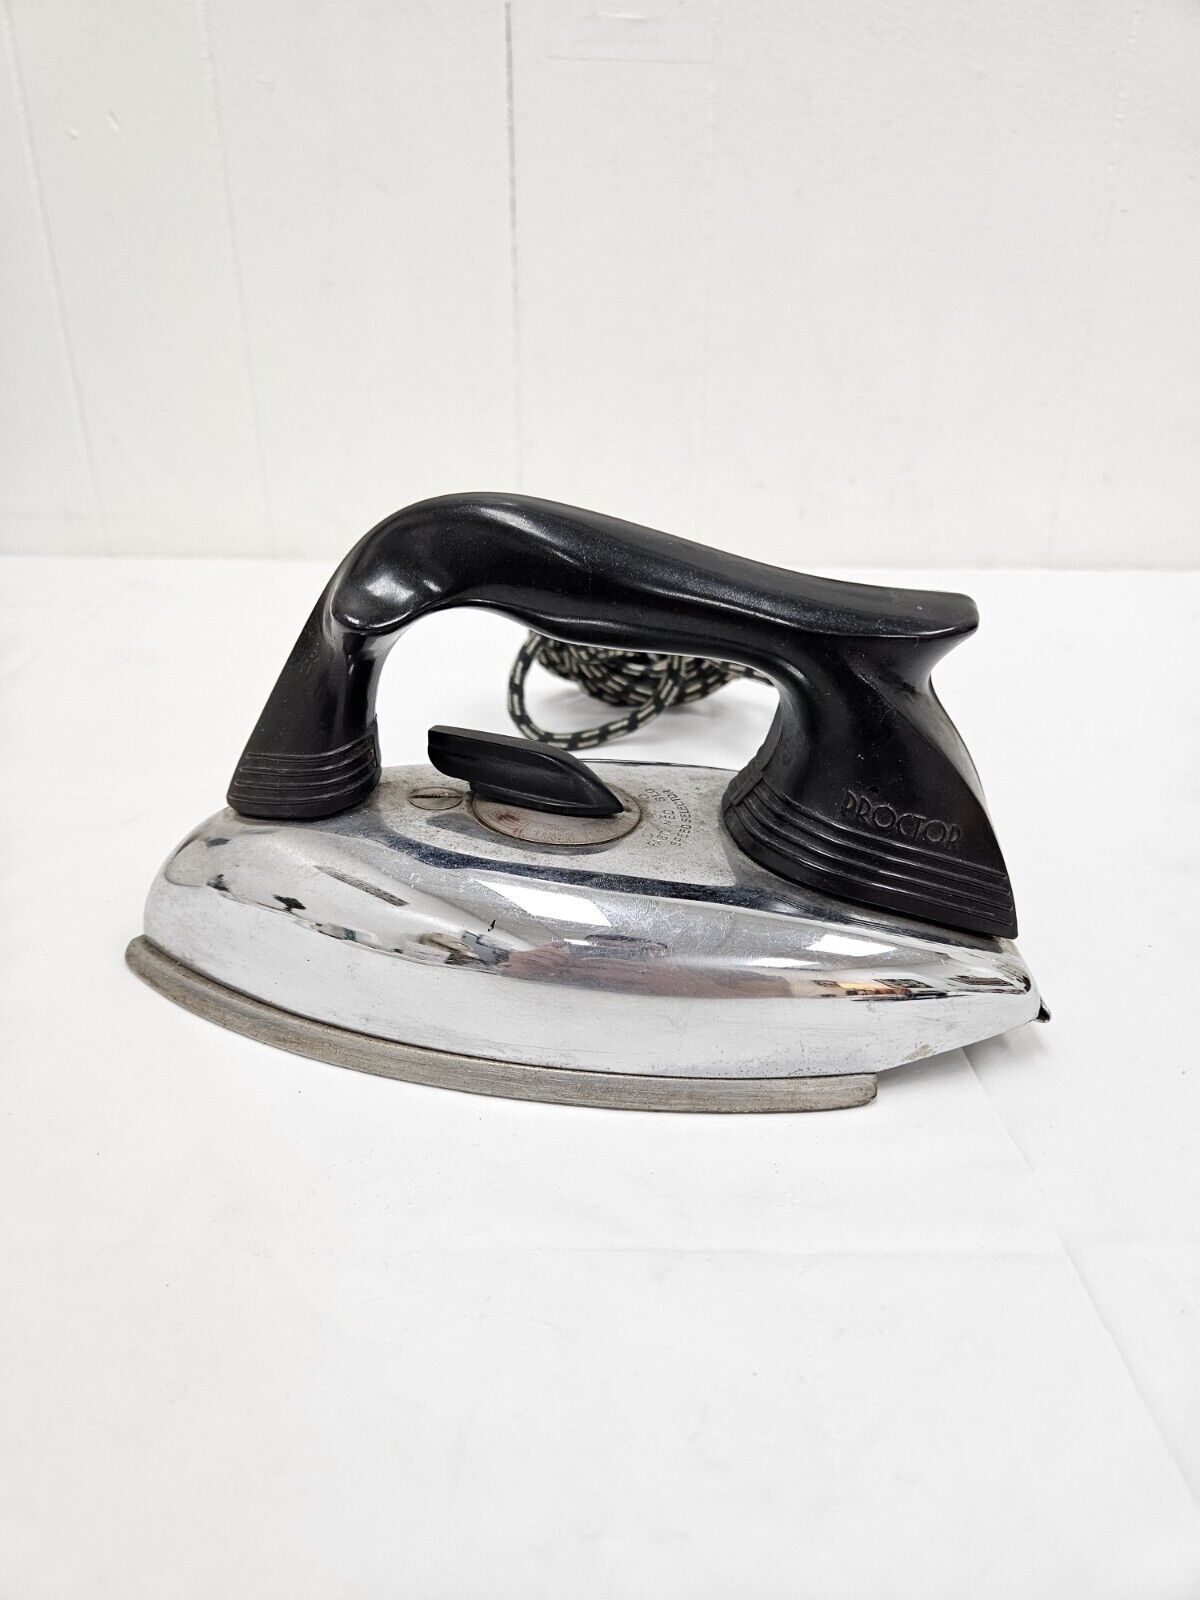 Vintage Proctor Electric Champion Dry Iron #975A